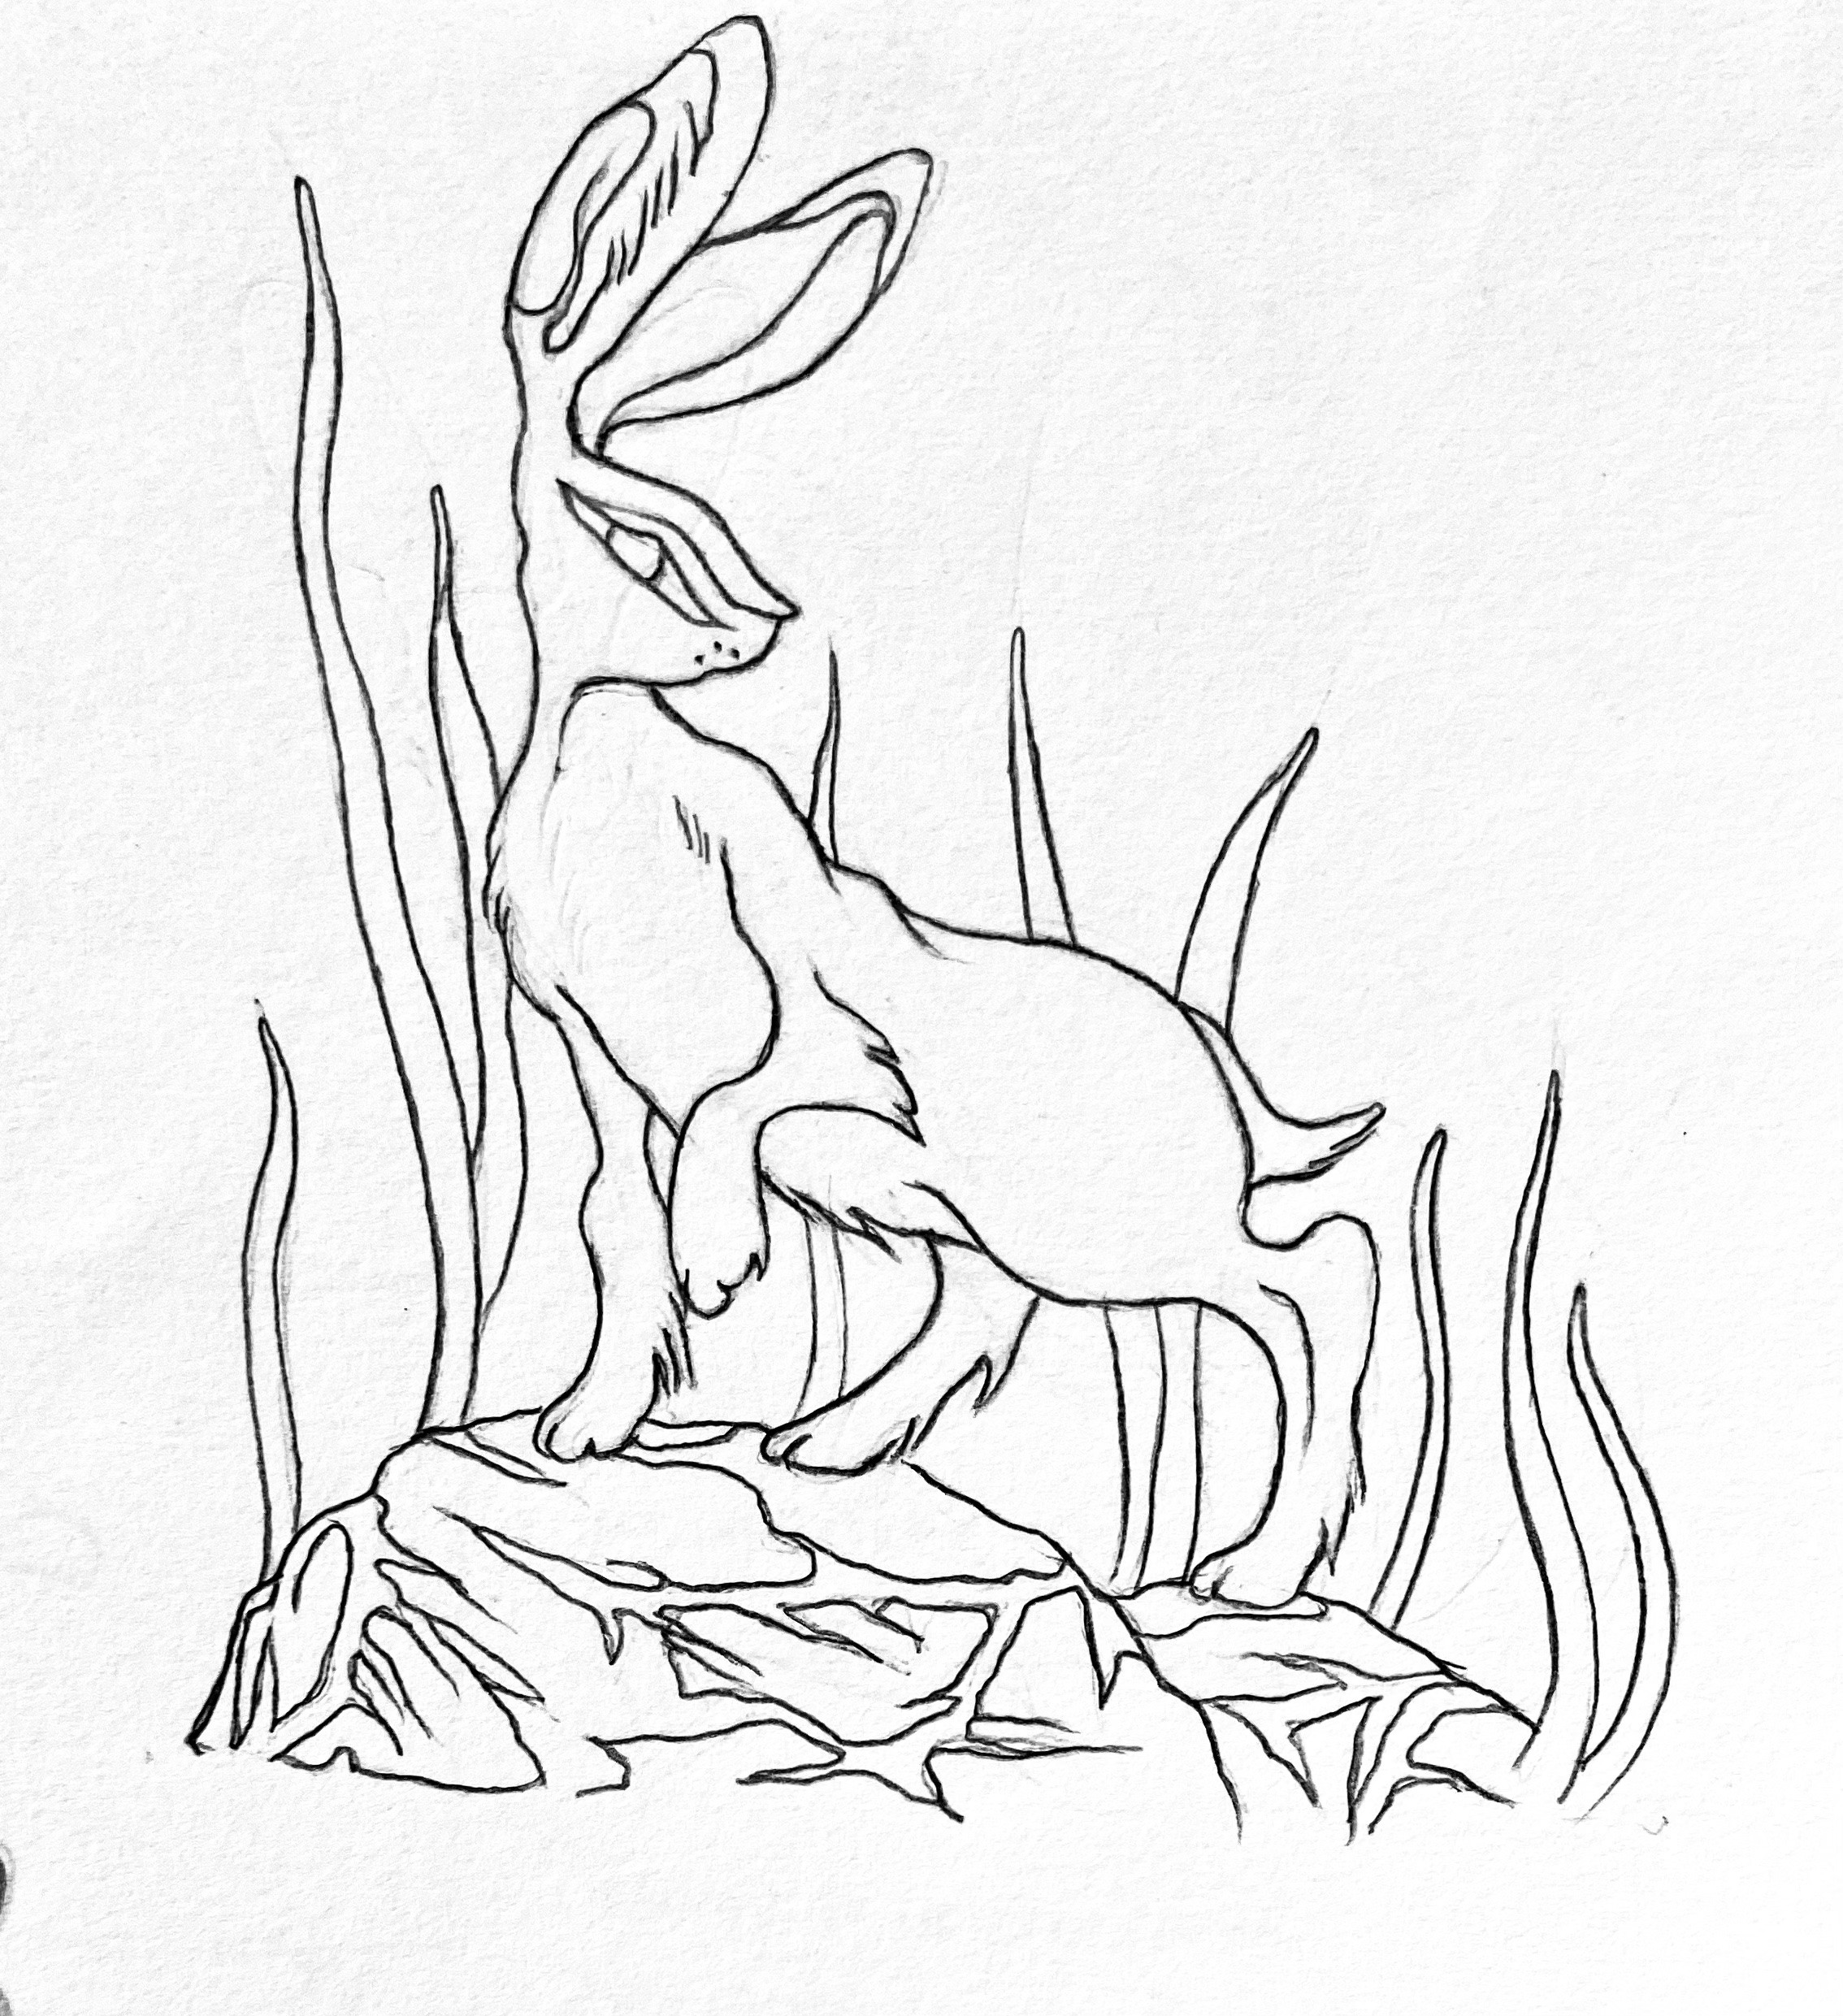 Linework Scan [HARE]